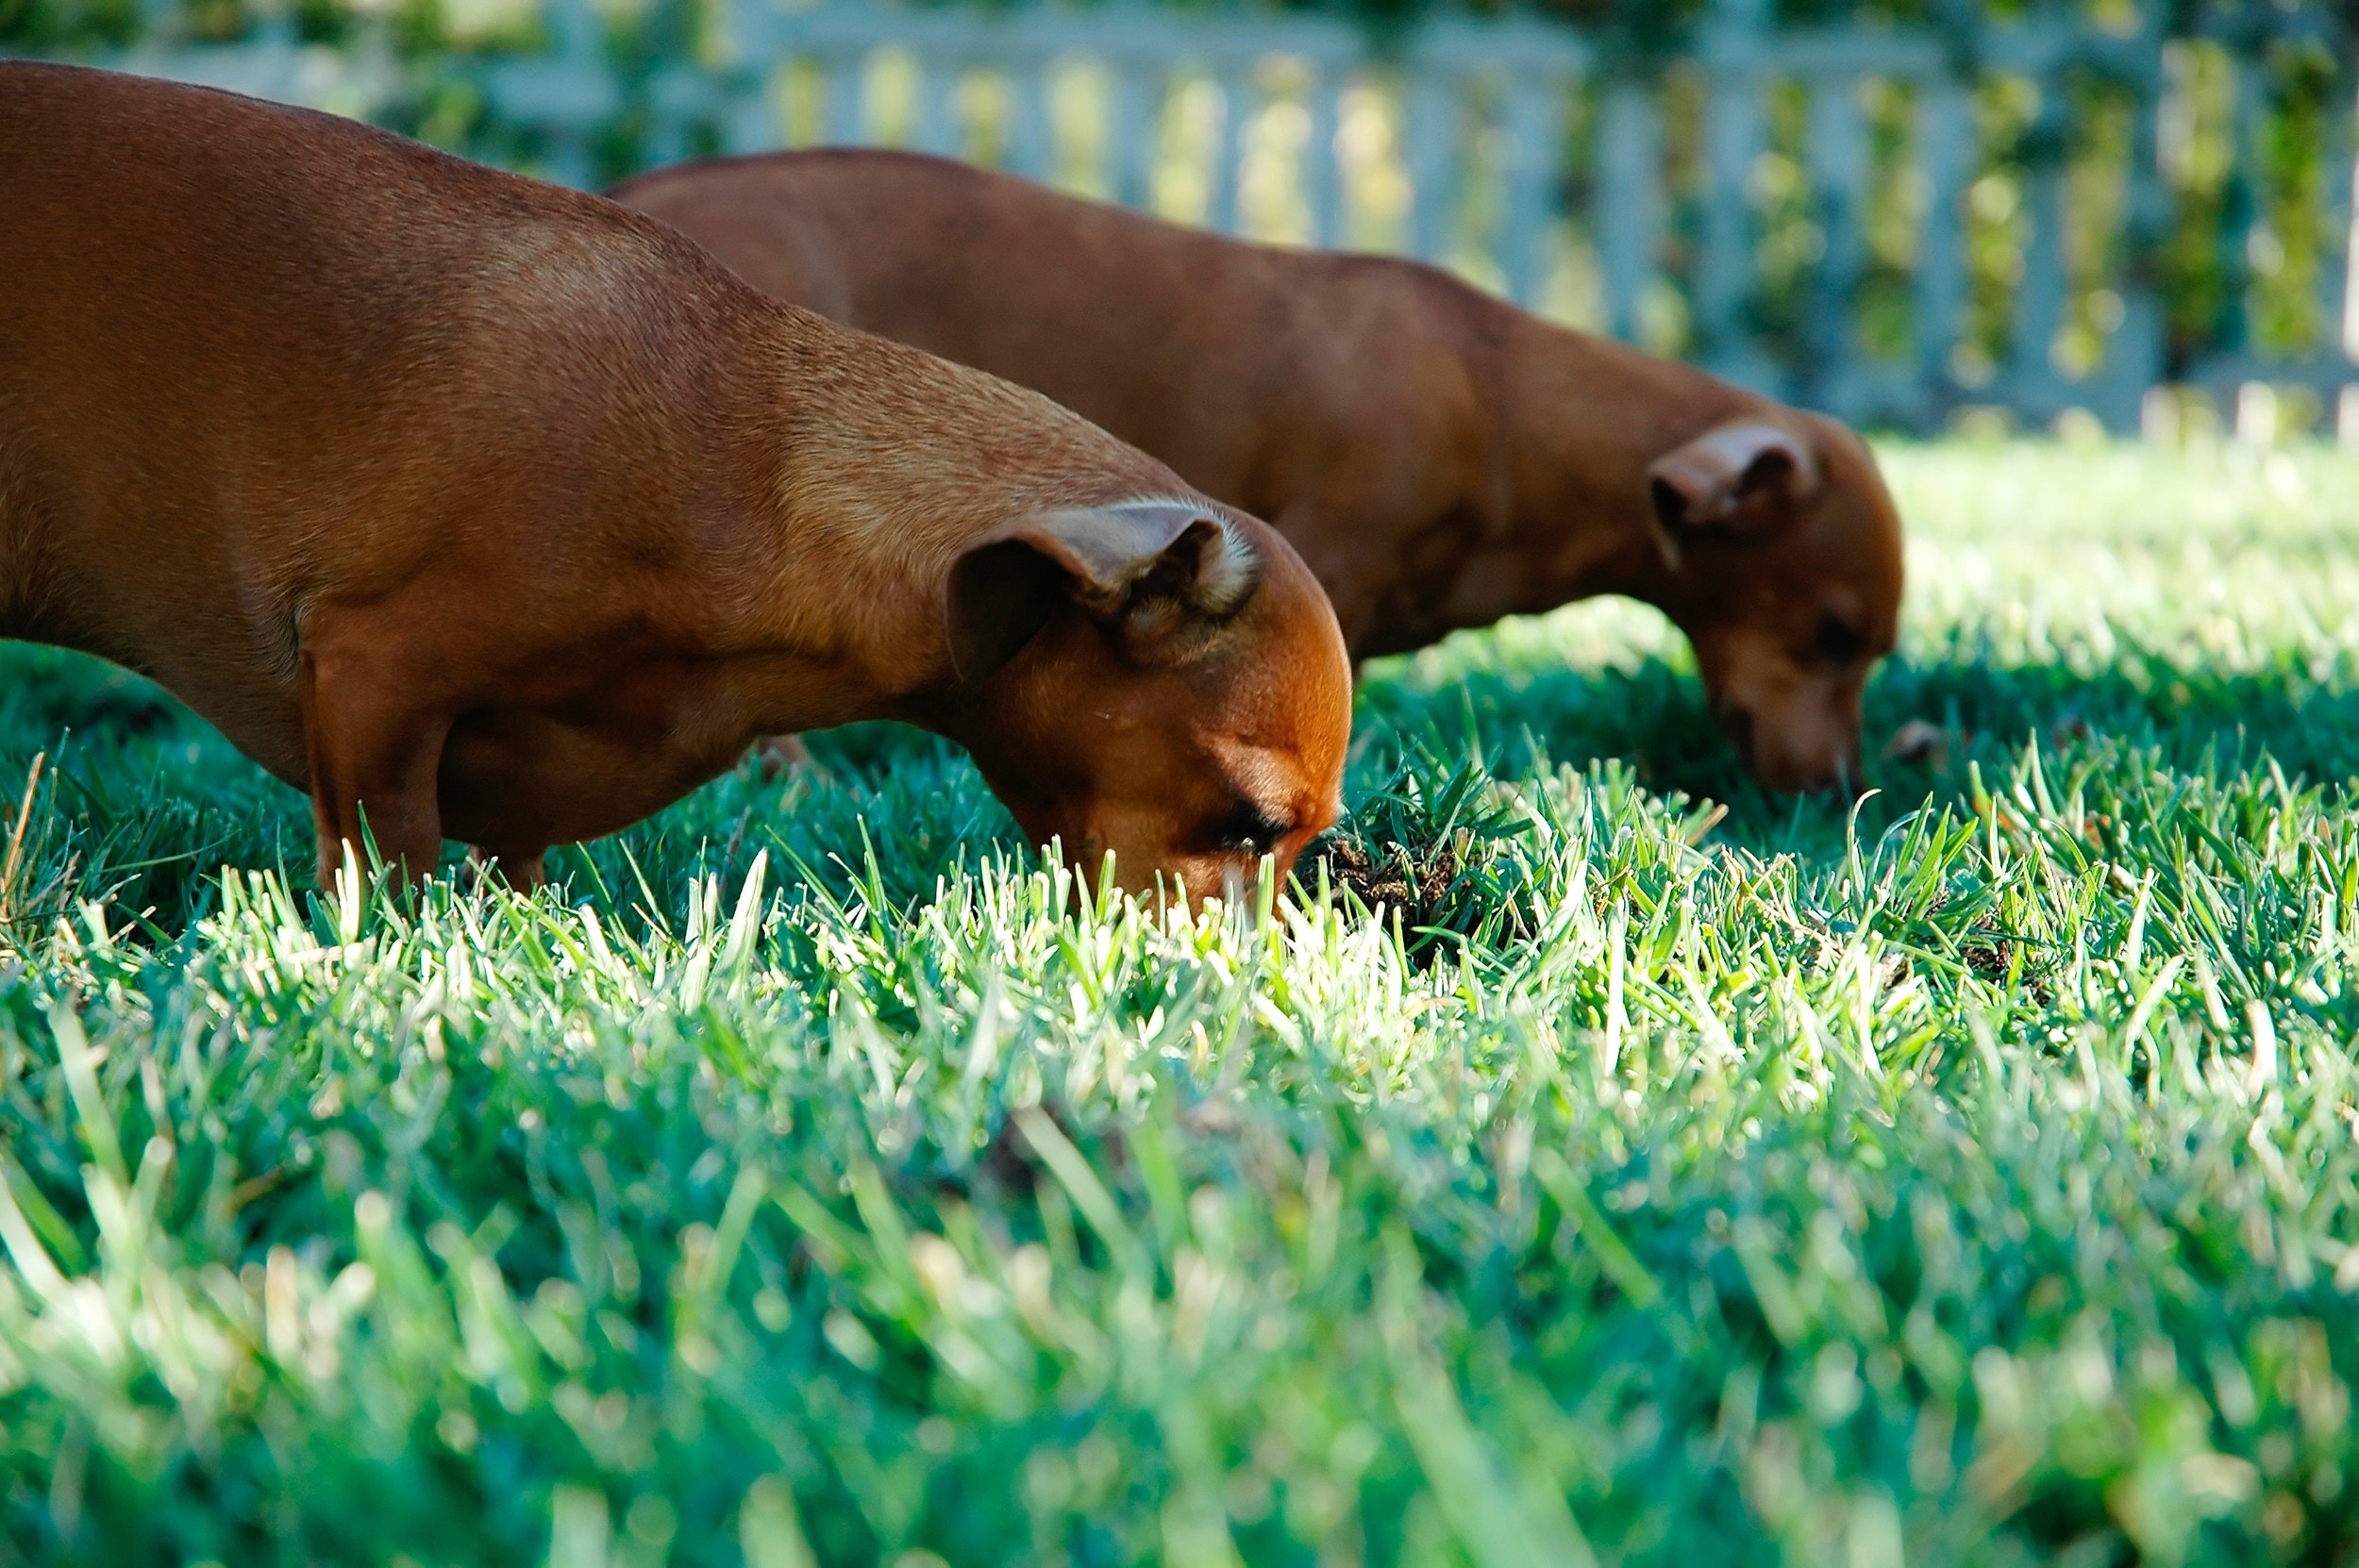 dog friendly lawn care tips